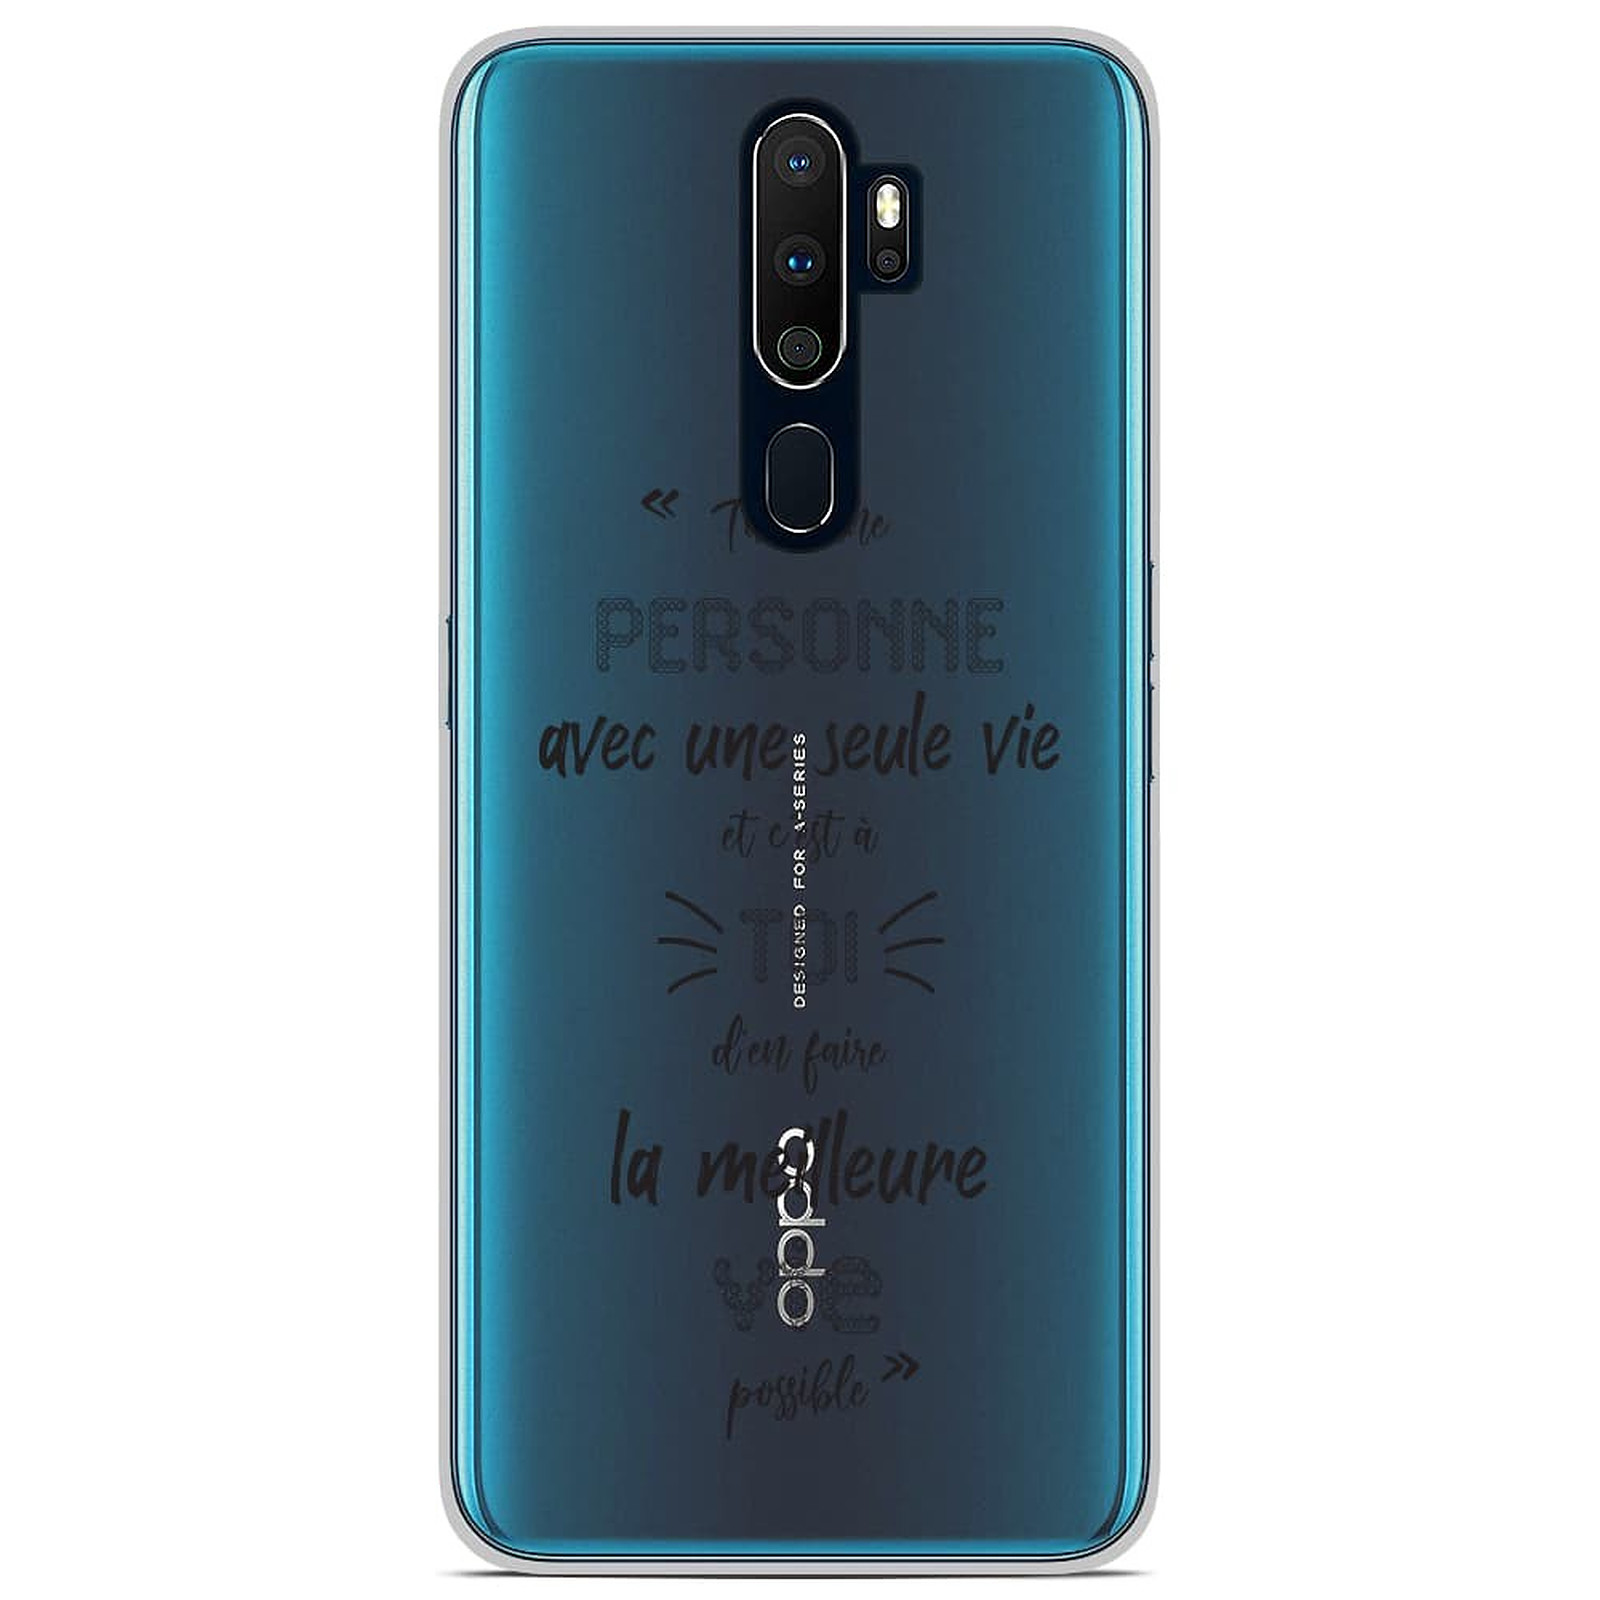 1001 Coques Coque silicone gel Oppo A9 2020 motif Une Seule Vie - Coque telephone 1001Coques